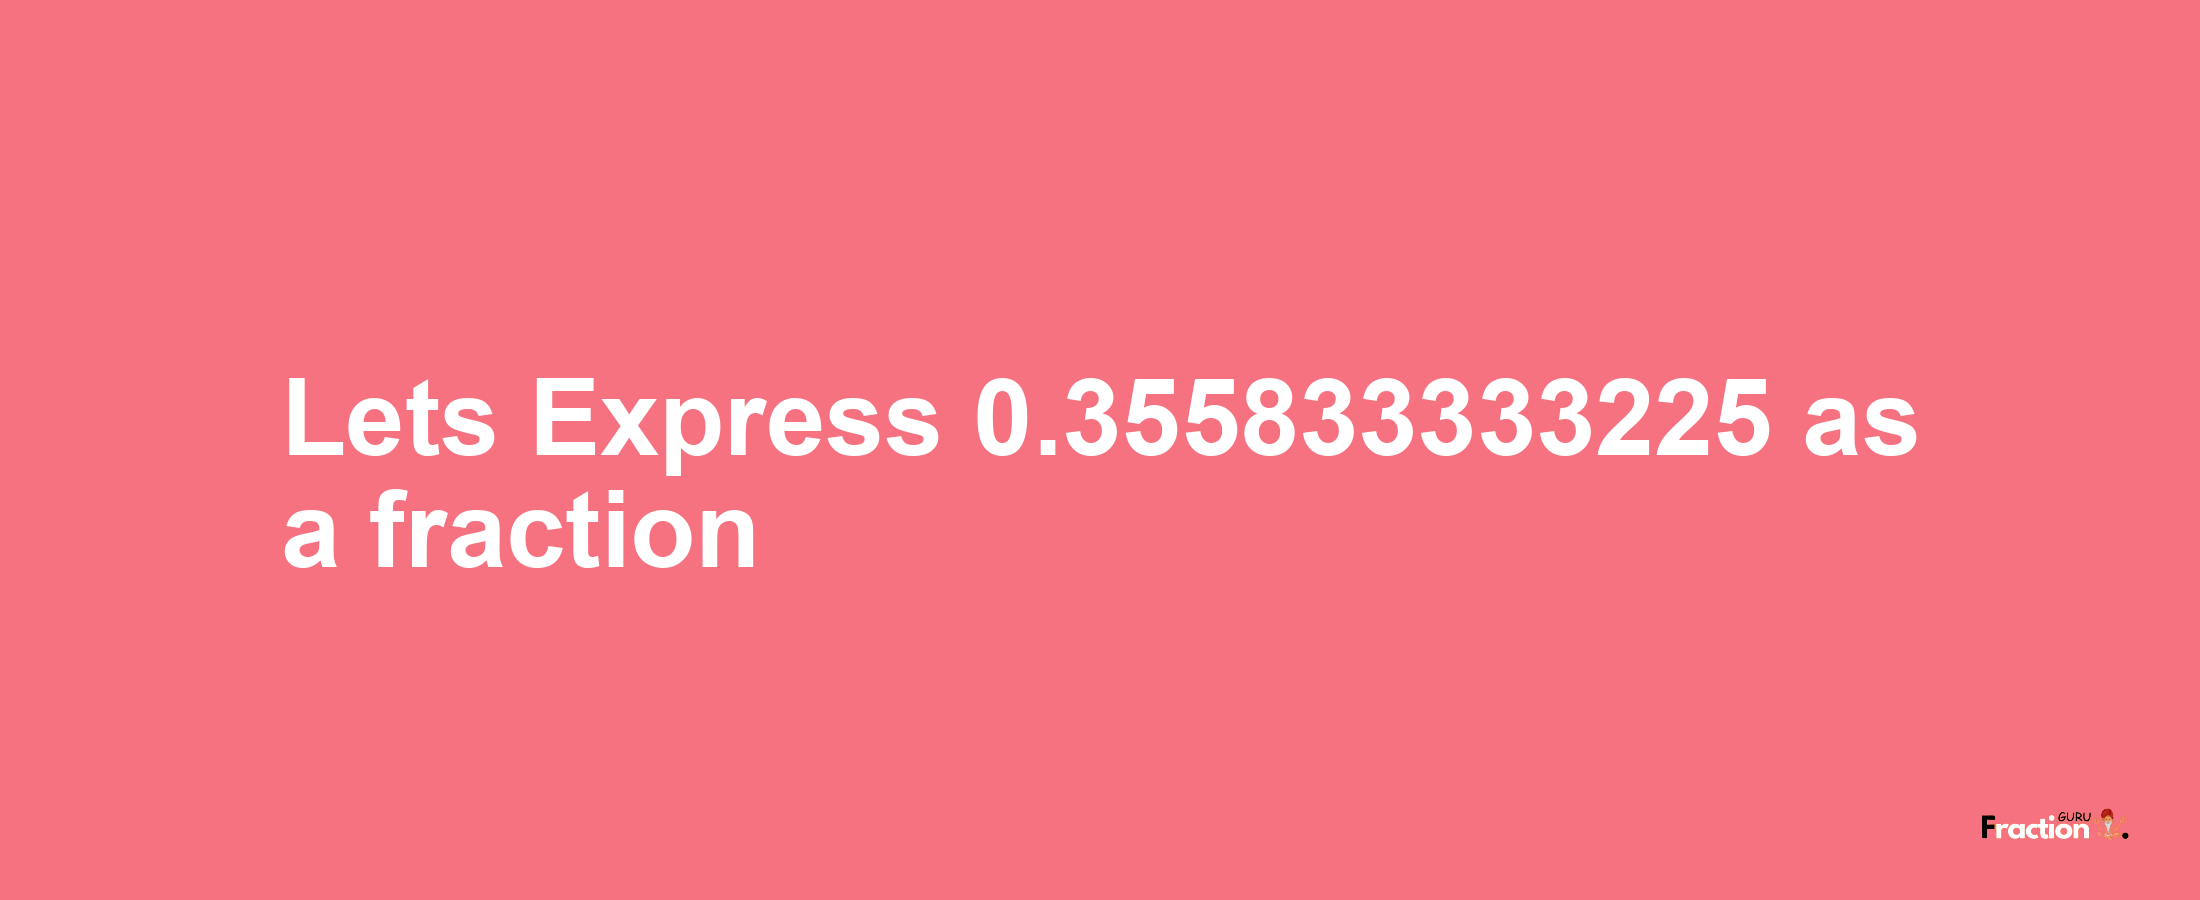 Lets Express 0.355833333225 as afraction